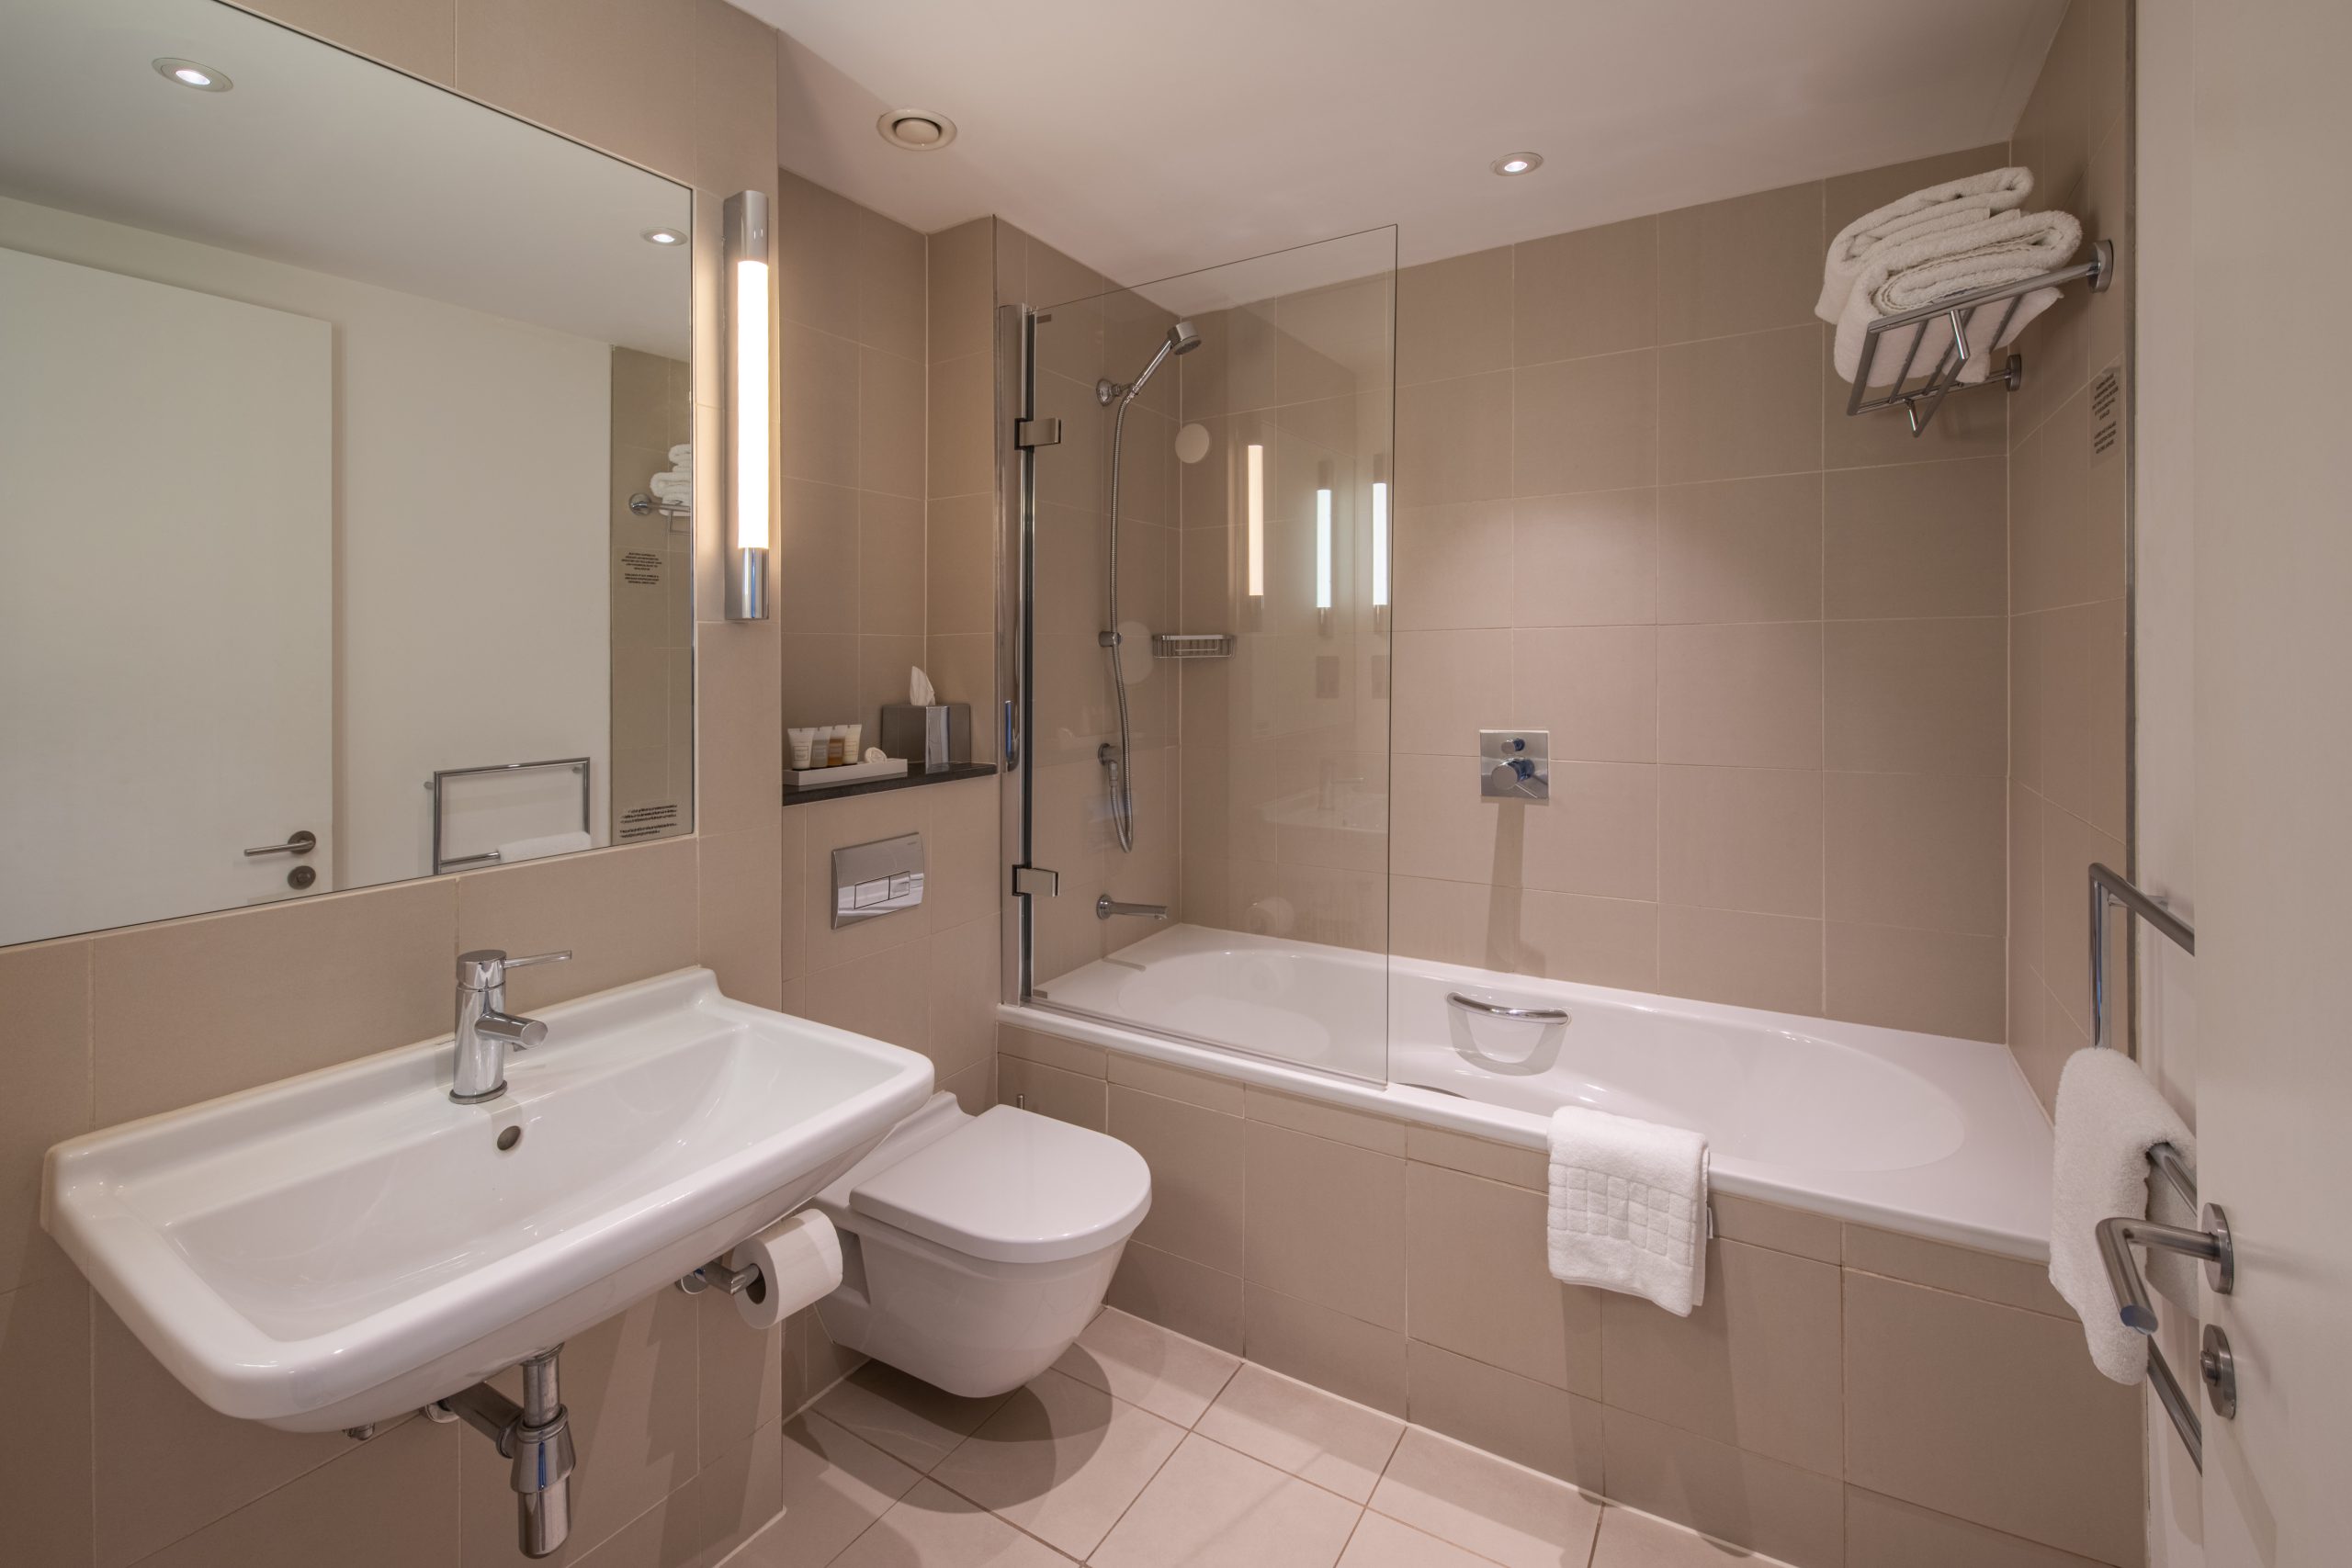 Deluxe bathroom with a built in shower and bathtub, located in Liverpool.